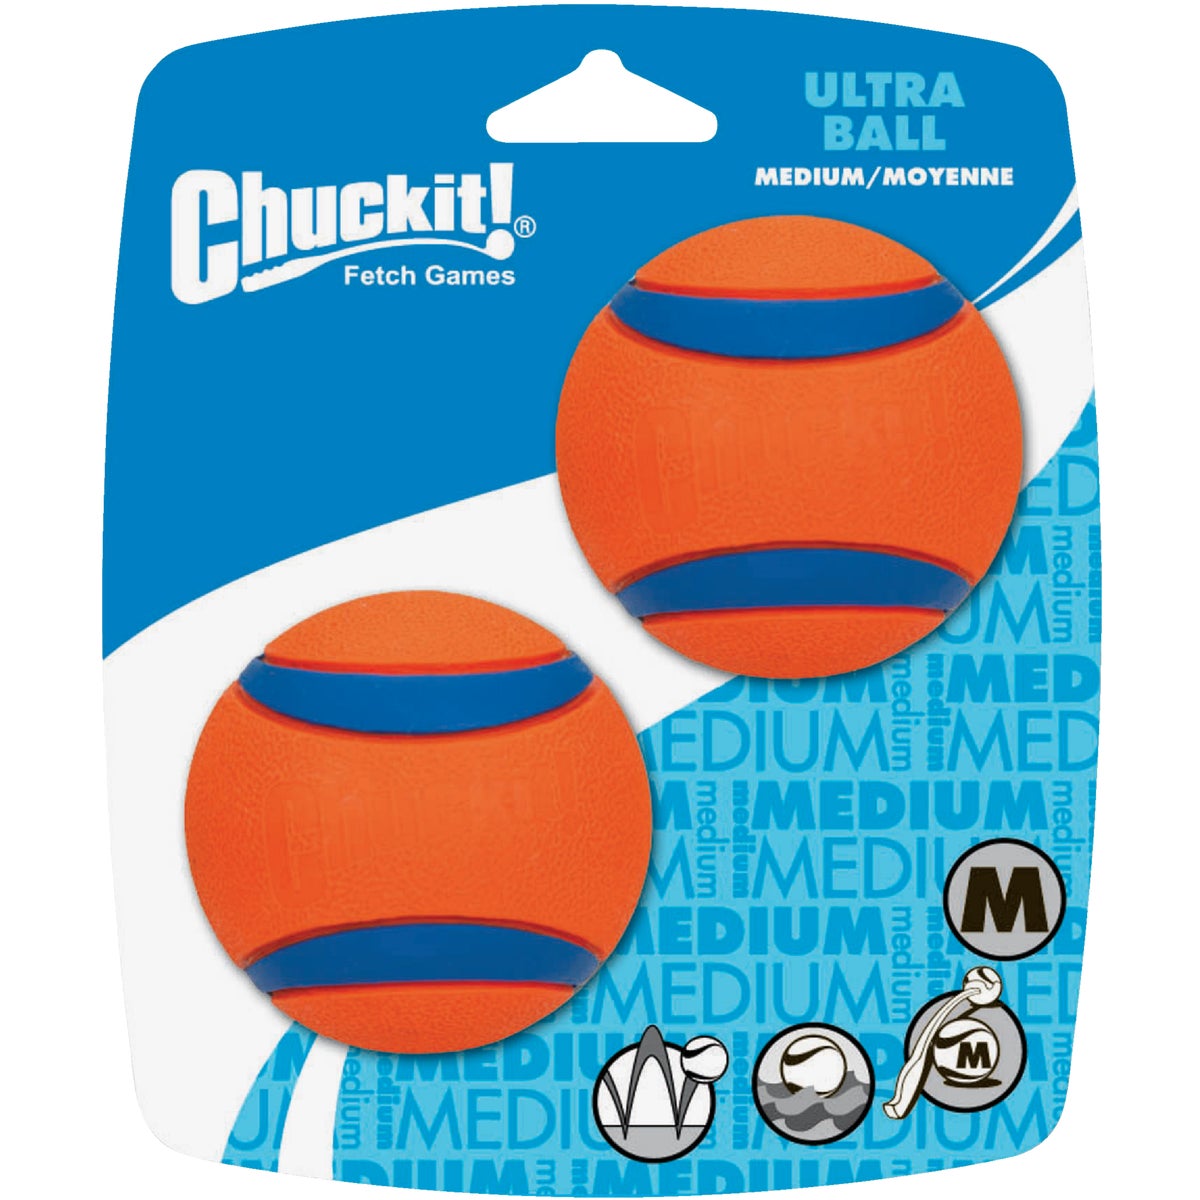 Item 800788, Ultra Ball dog toy developed to have a high bounce and high buoyancy.